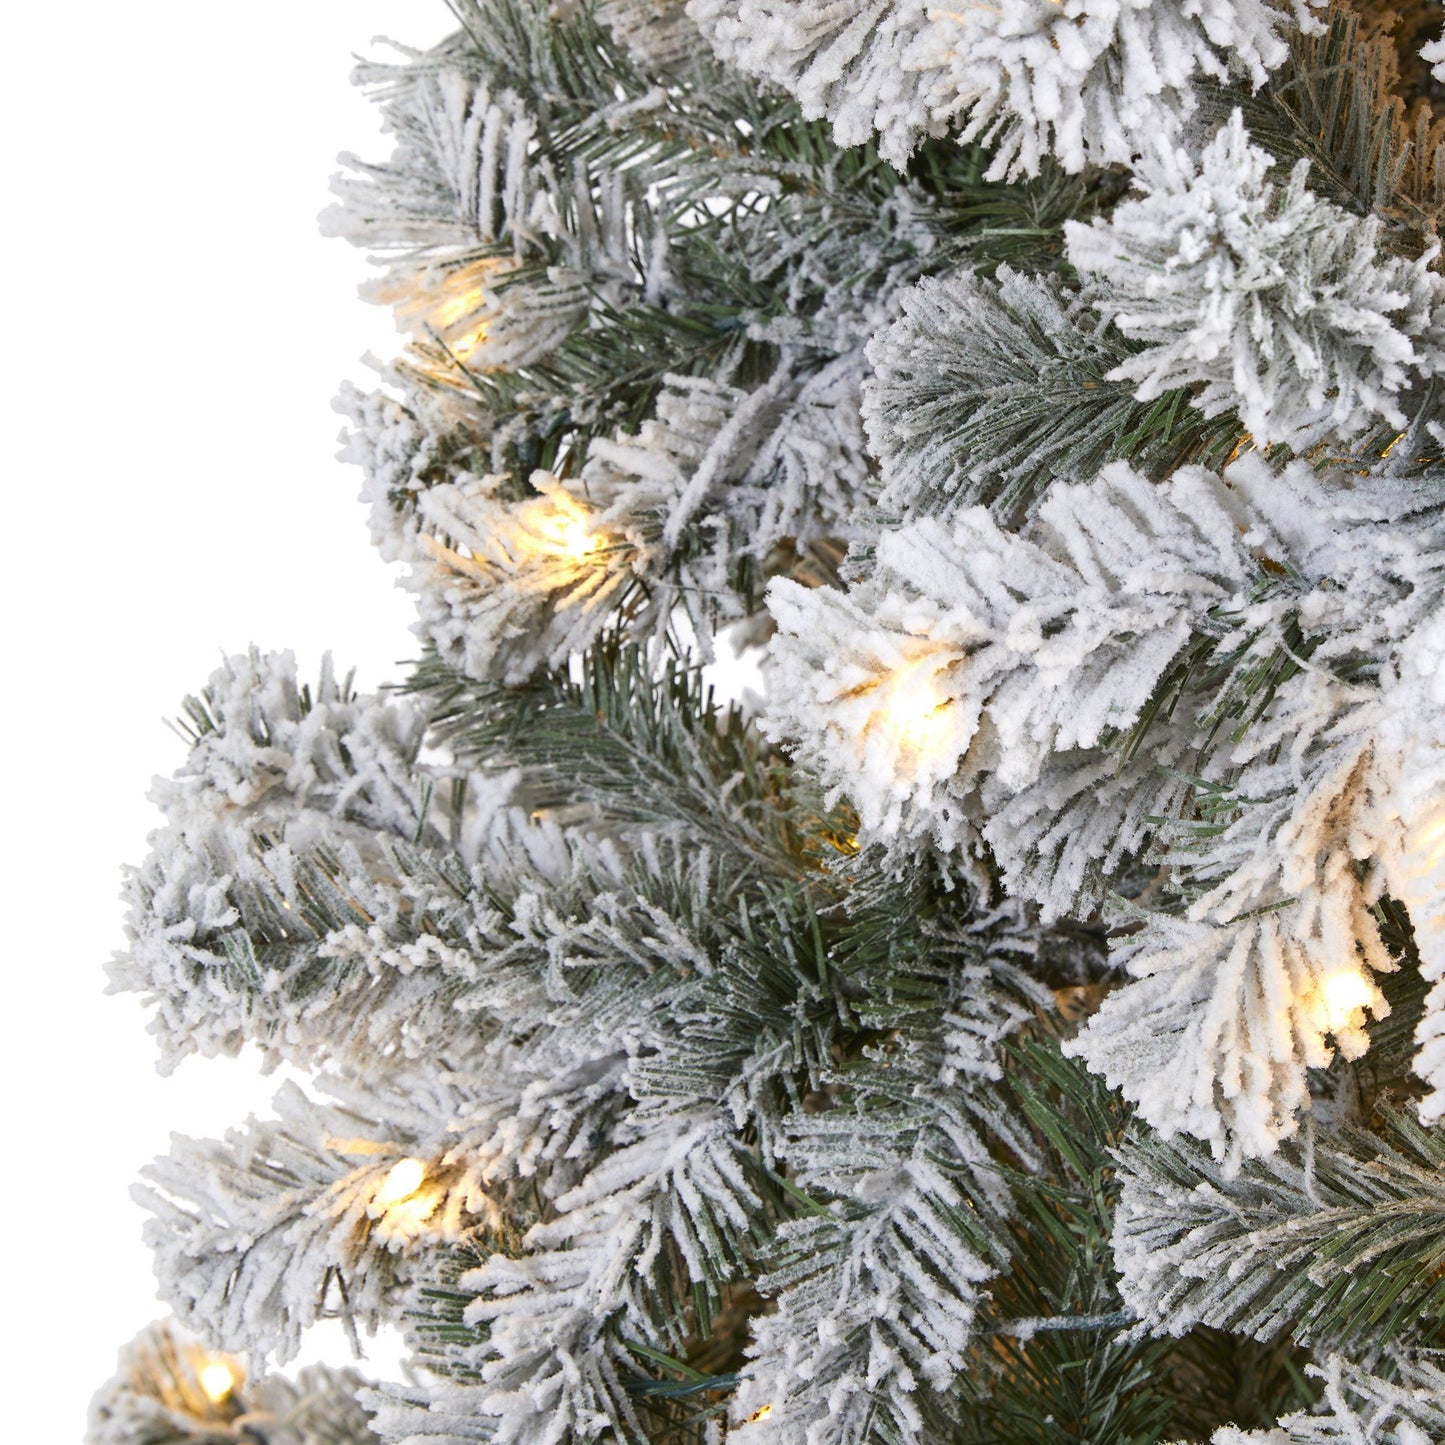 8' Flocked West Virginia Fir Artificial Christmas Tree with 500 Clear ...